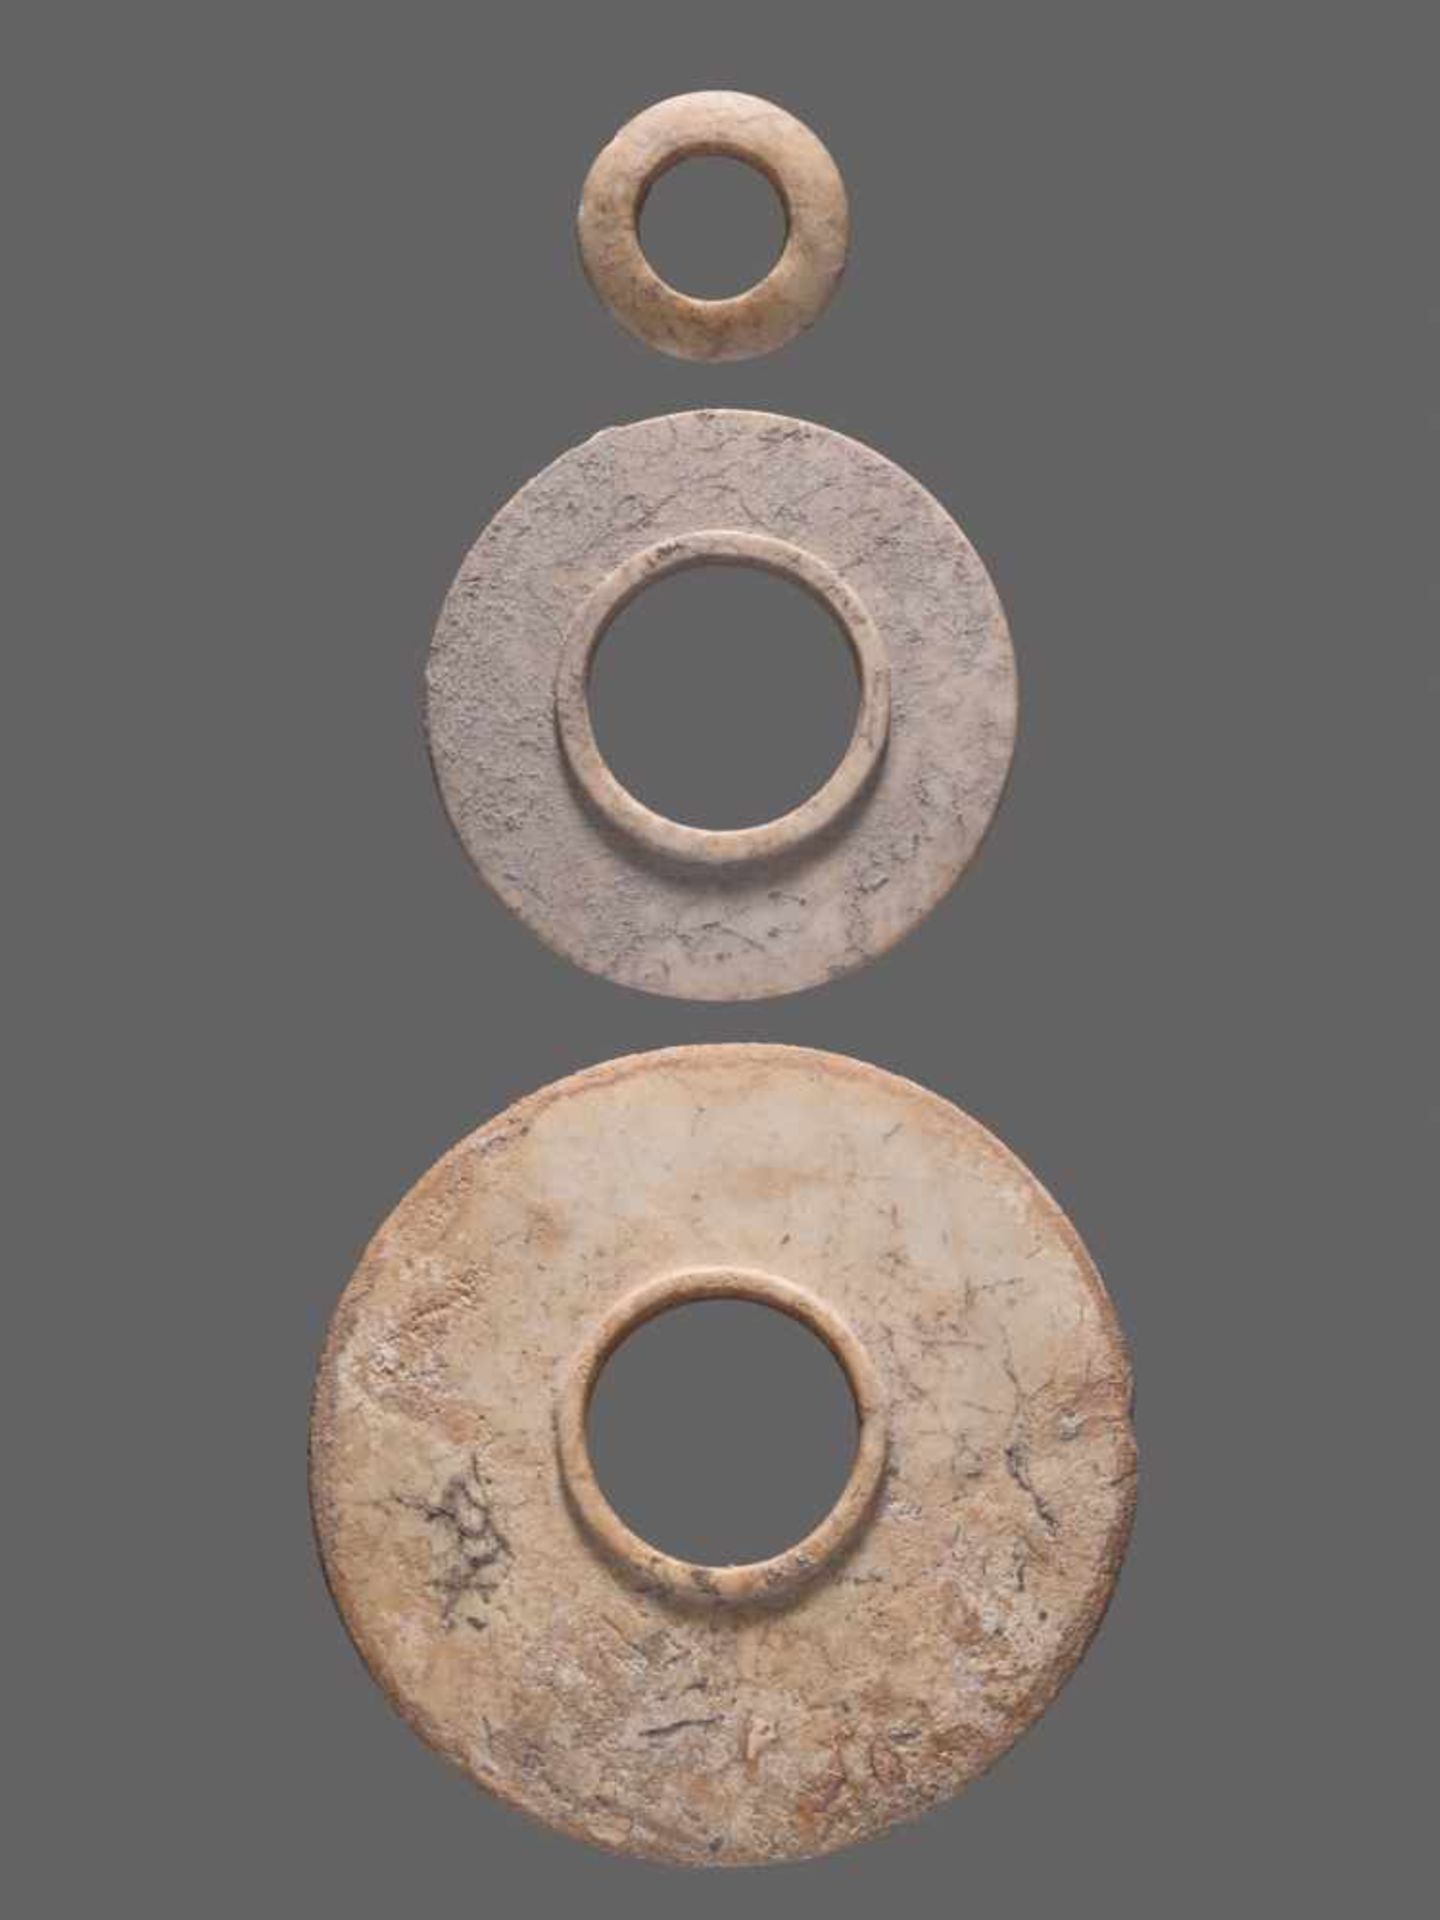 A GROUP OF TWO HEAVILY ALTERED SHANG PERIOD JADE DISCS AND A RING, ALL WITH A BEAUTIFUL